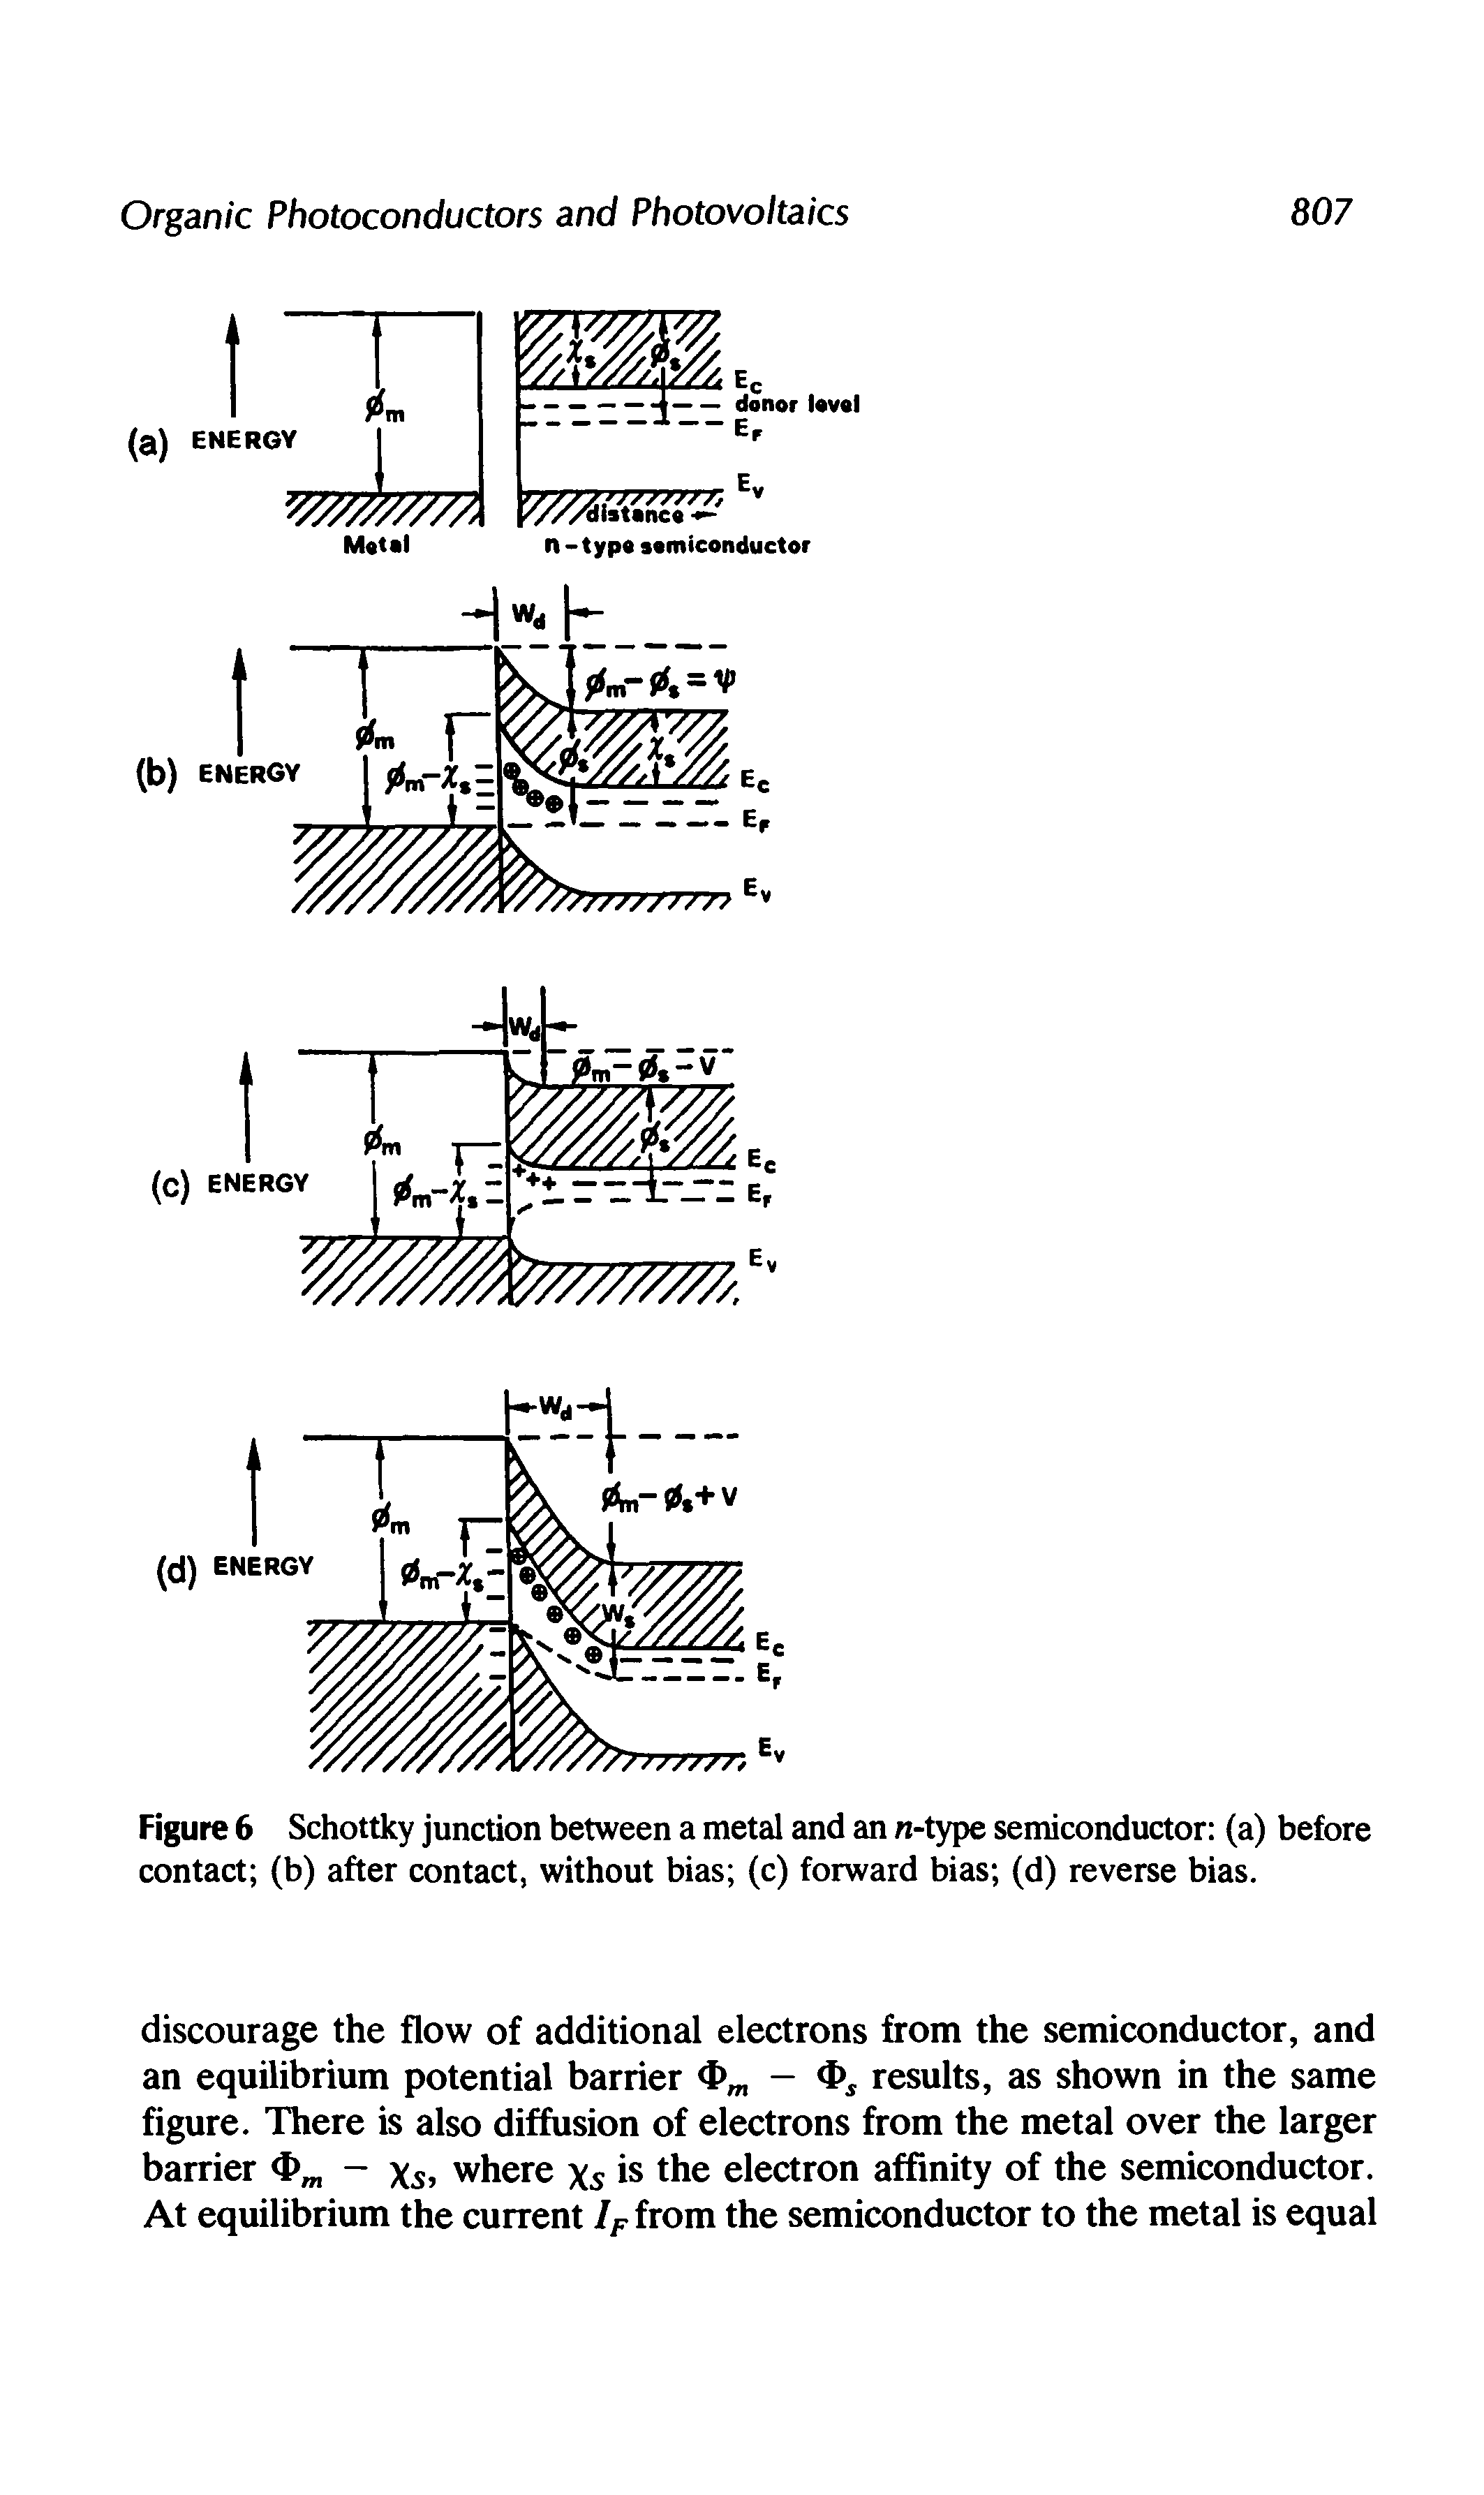 Figure 6 Schottky junction between a metal and an n-type semiconductor (a) before contact (b) after contact, without bias (c) forward bias (d) reverse bias.